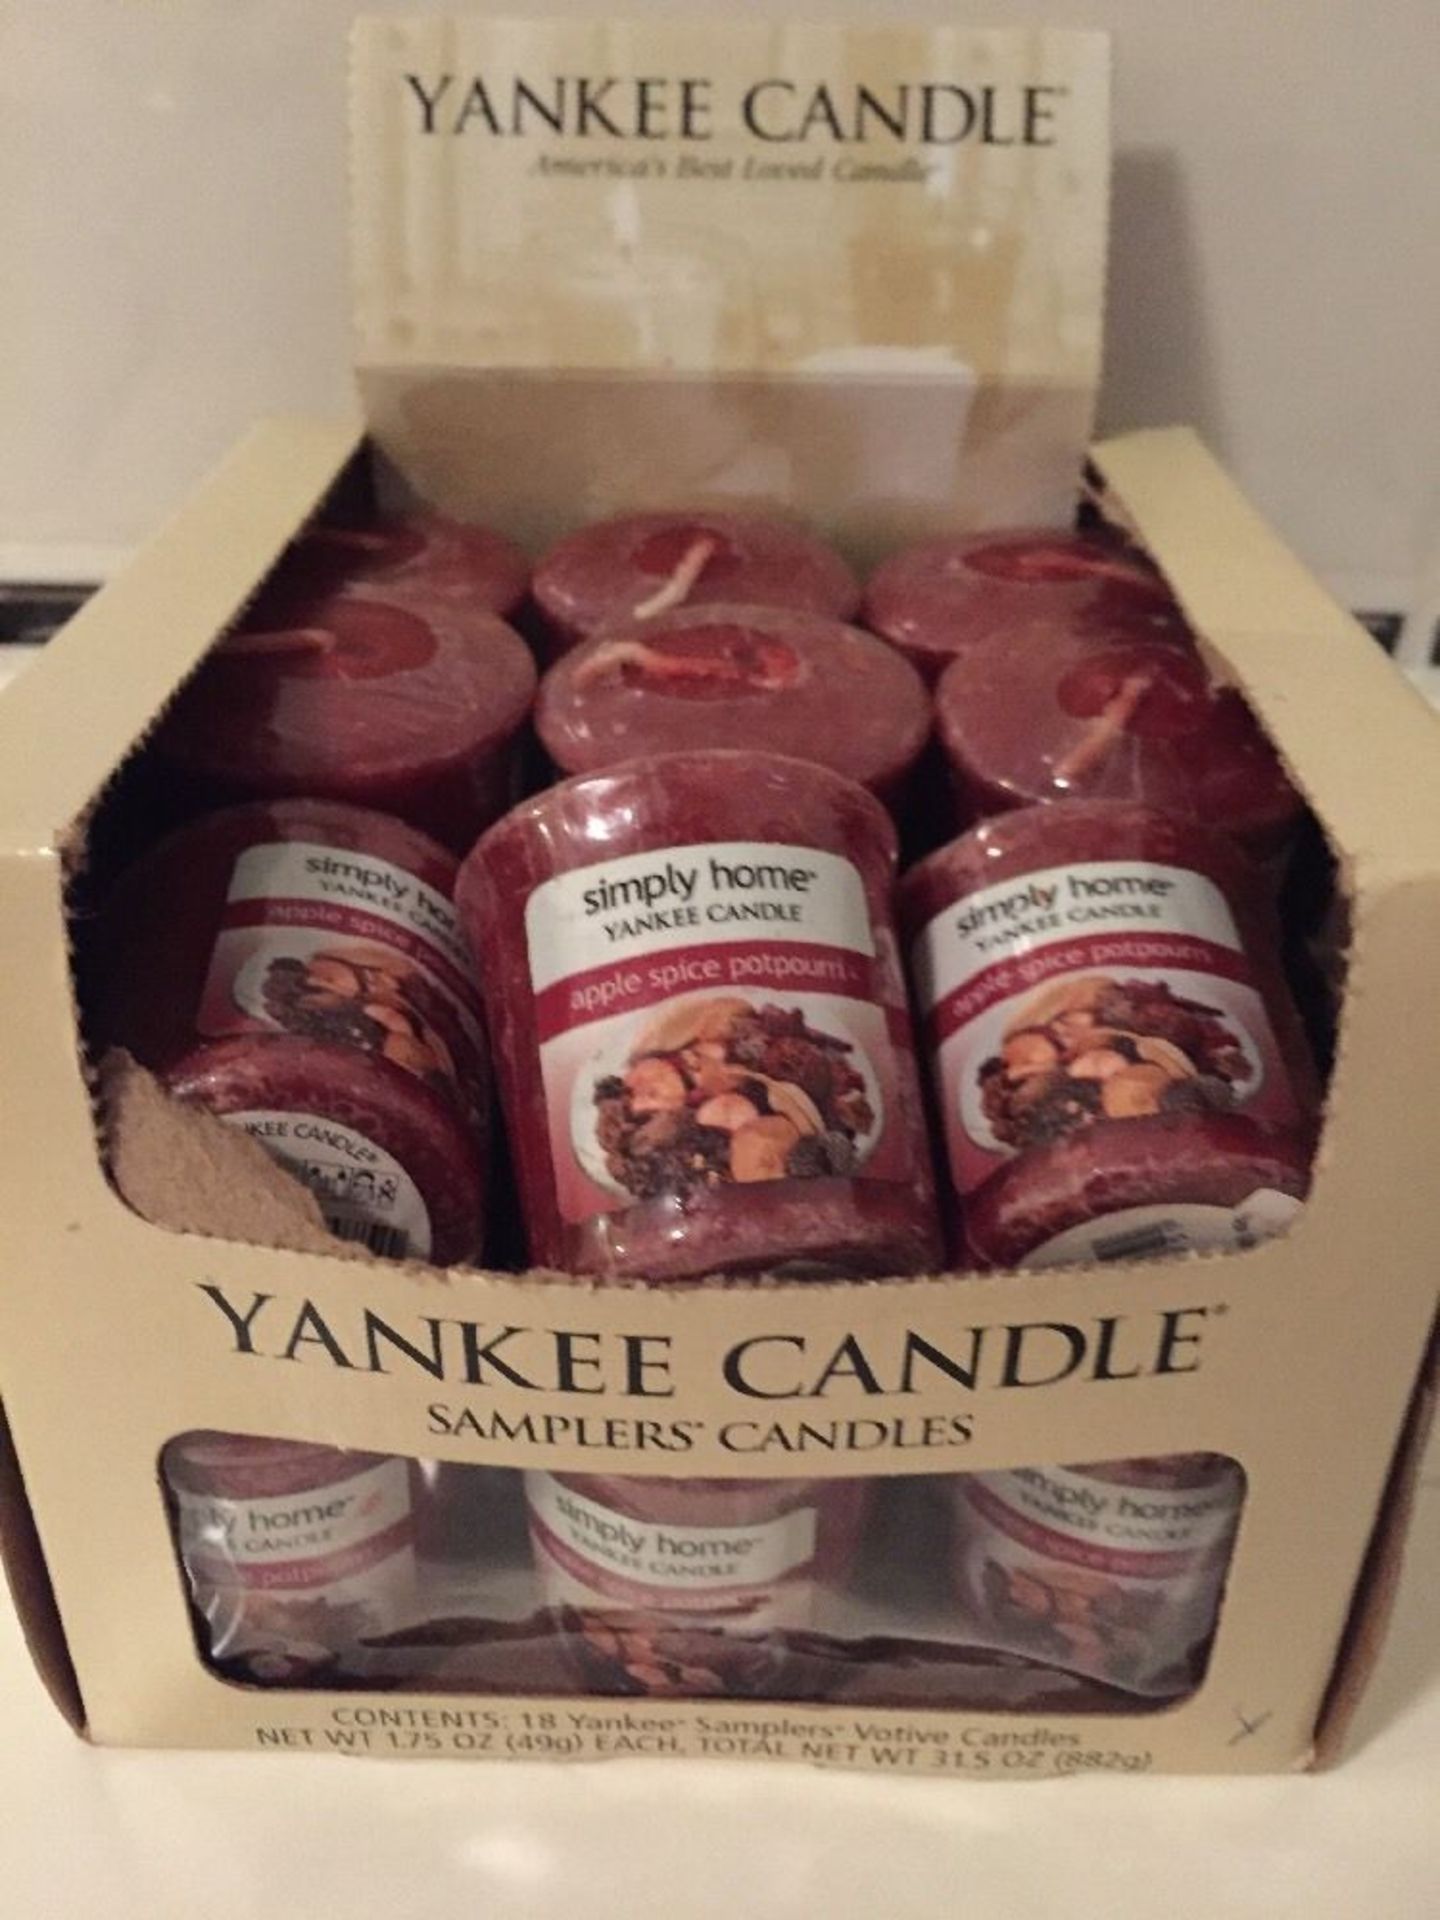 V *TRADE QTY* Brand New 18 x Yankee Candle Apple Spice Pot Pouri 49g eBaY Price£27.00 X 5 YOUR BID - Image 2 of 2